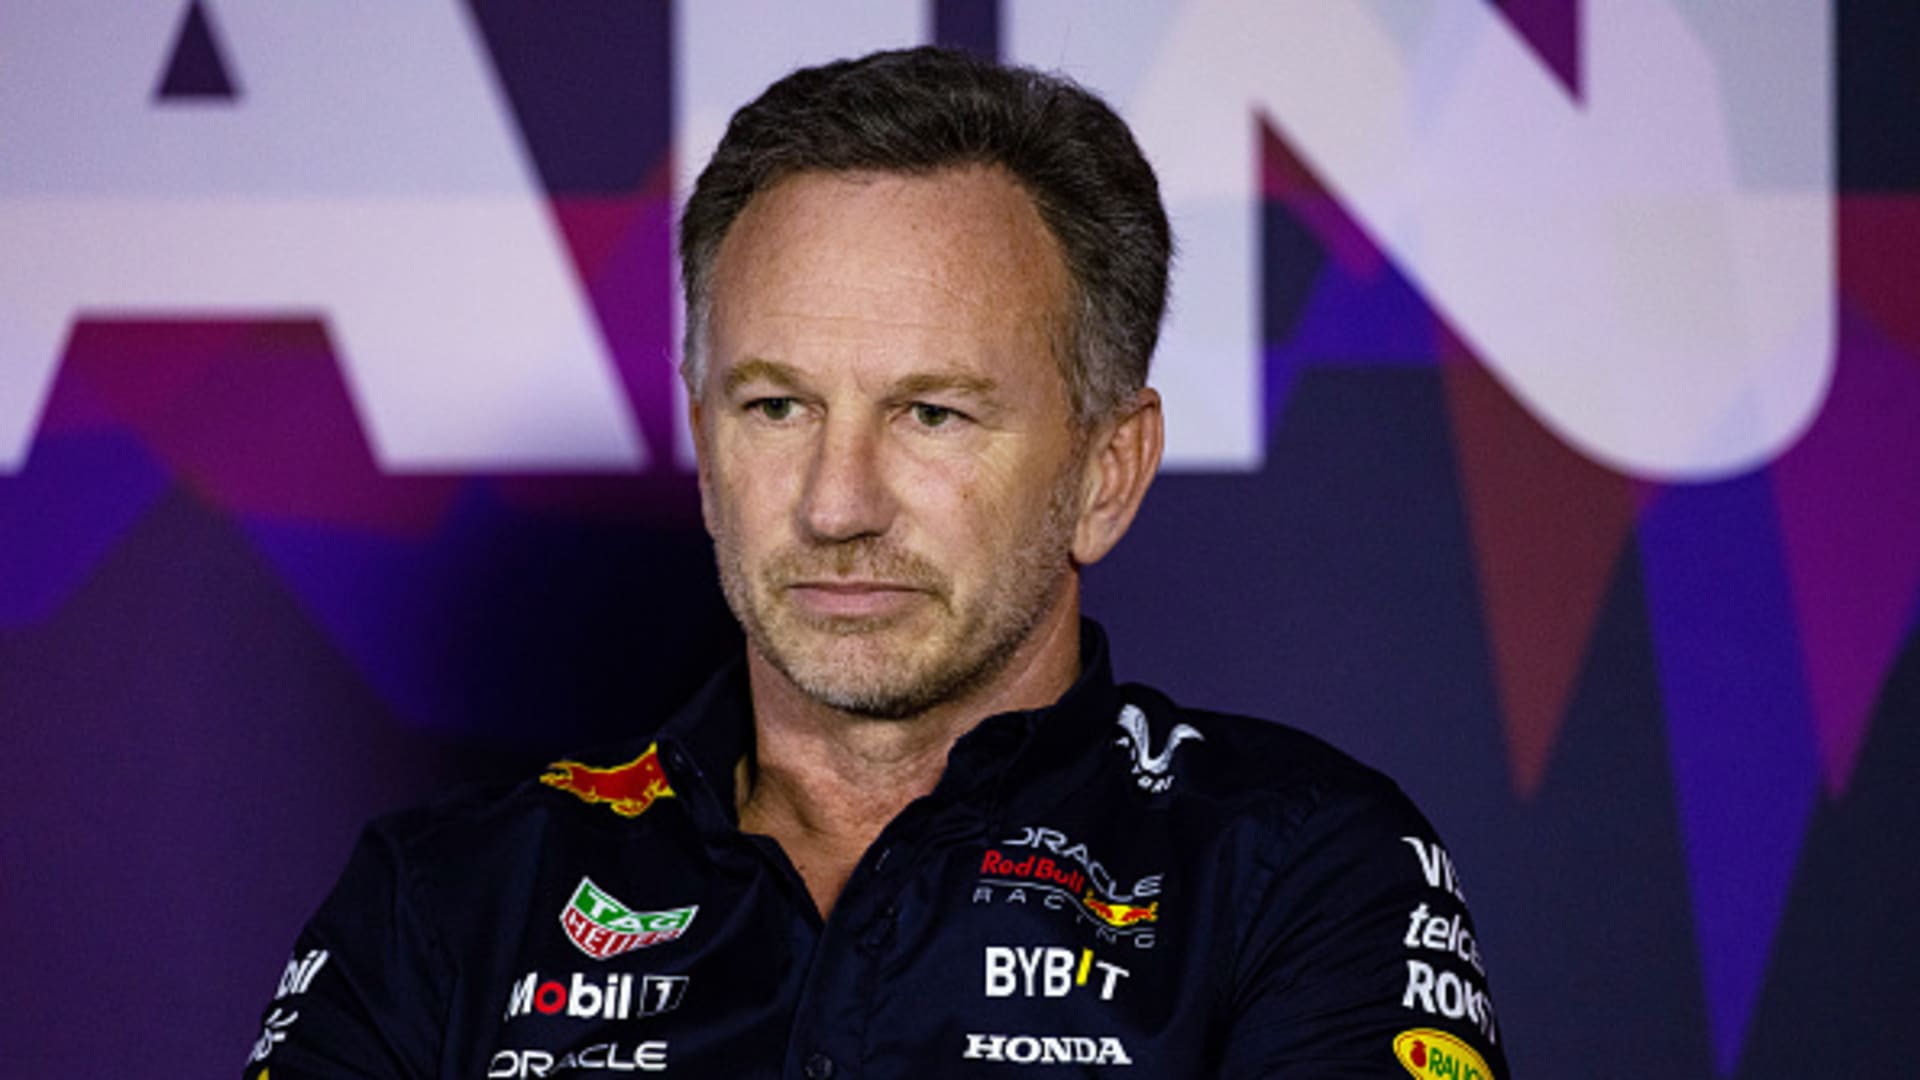 Horner to stay on at Red Bull after being cleared by investigation